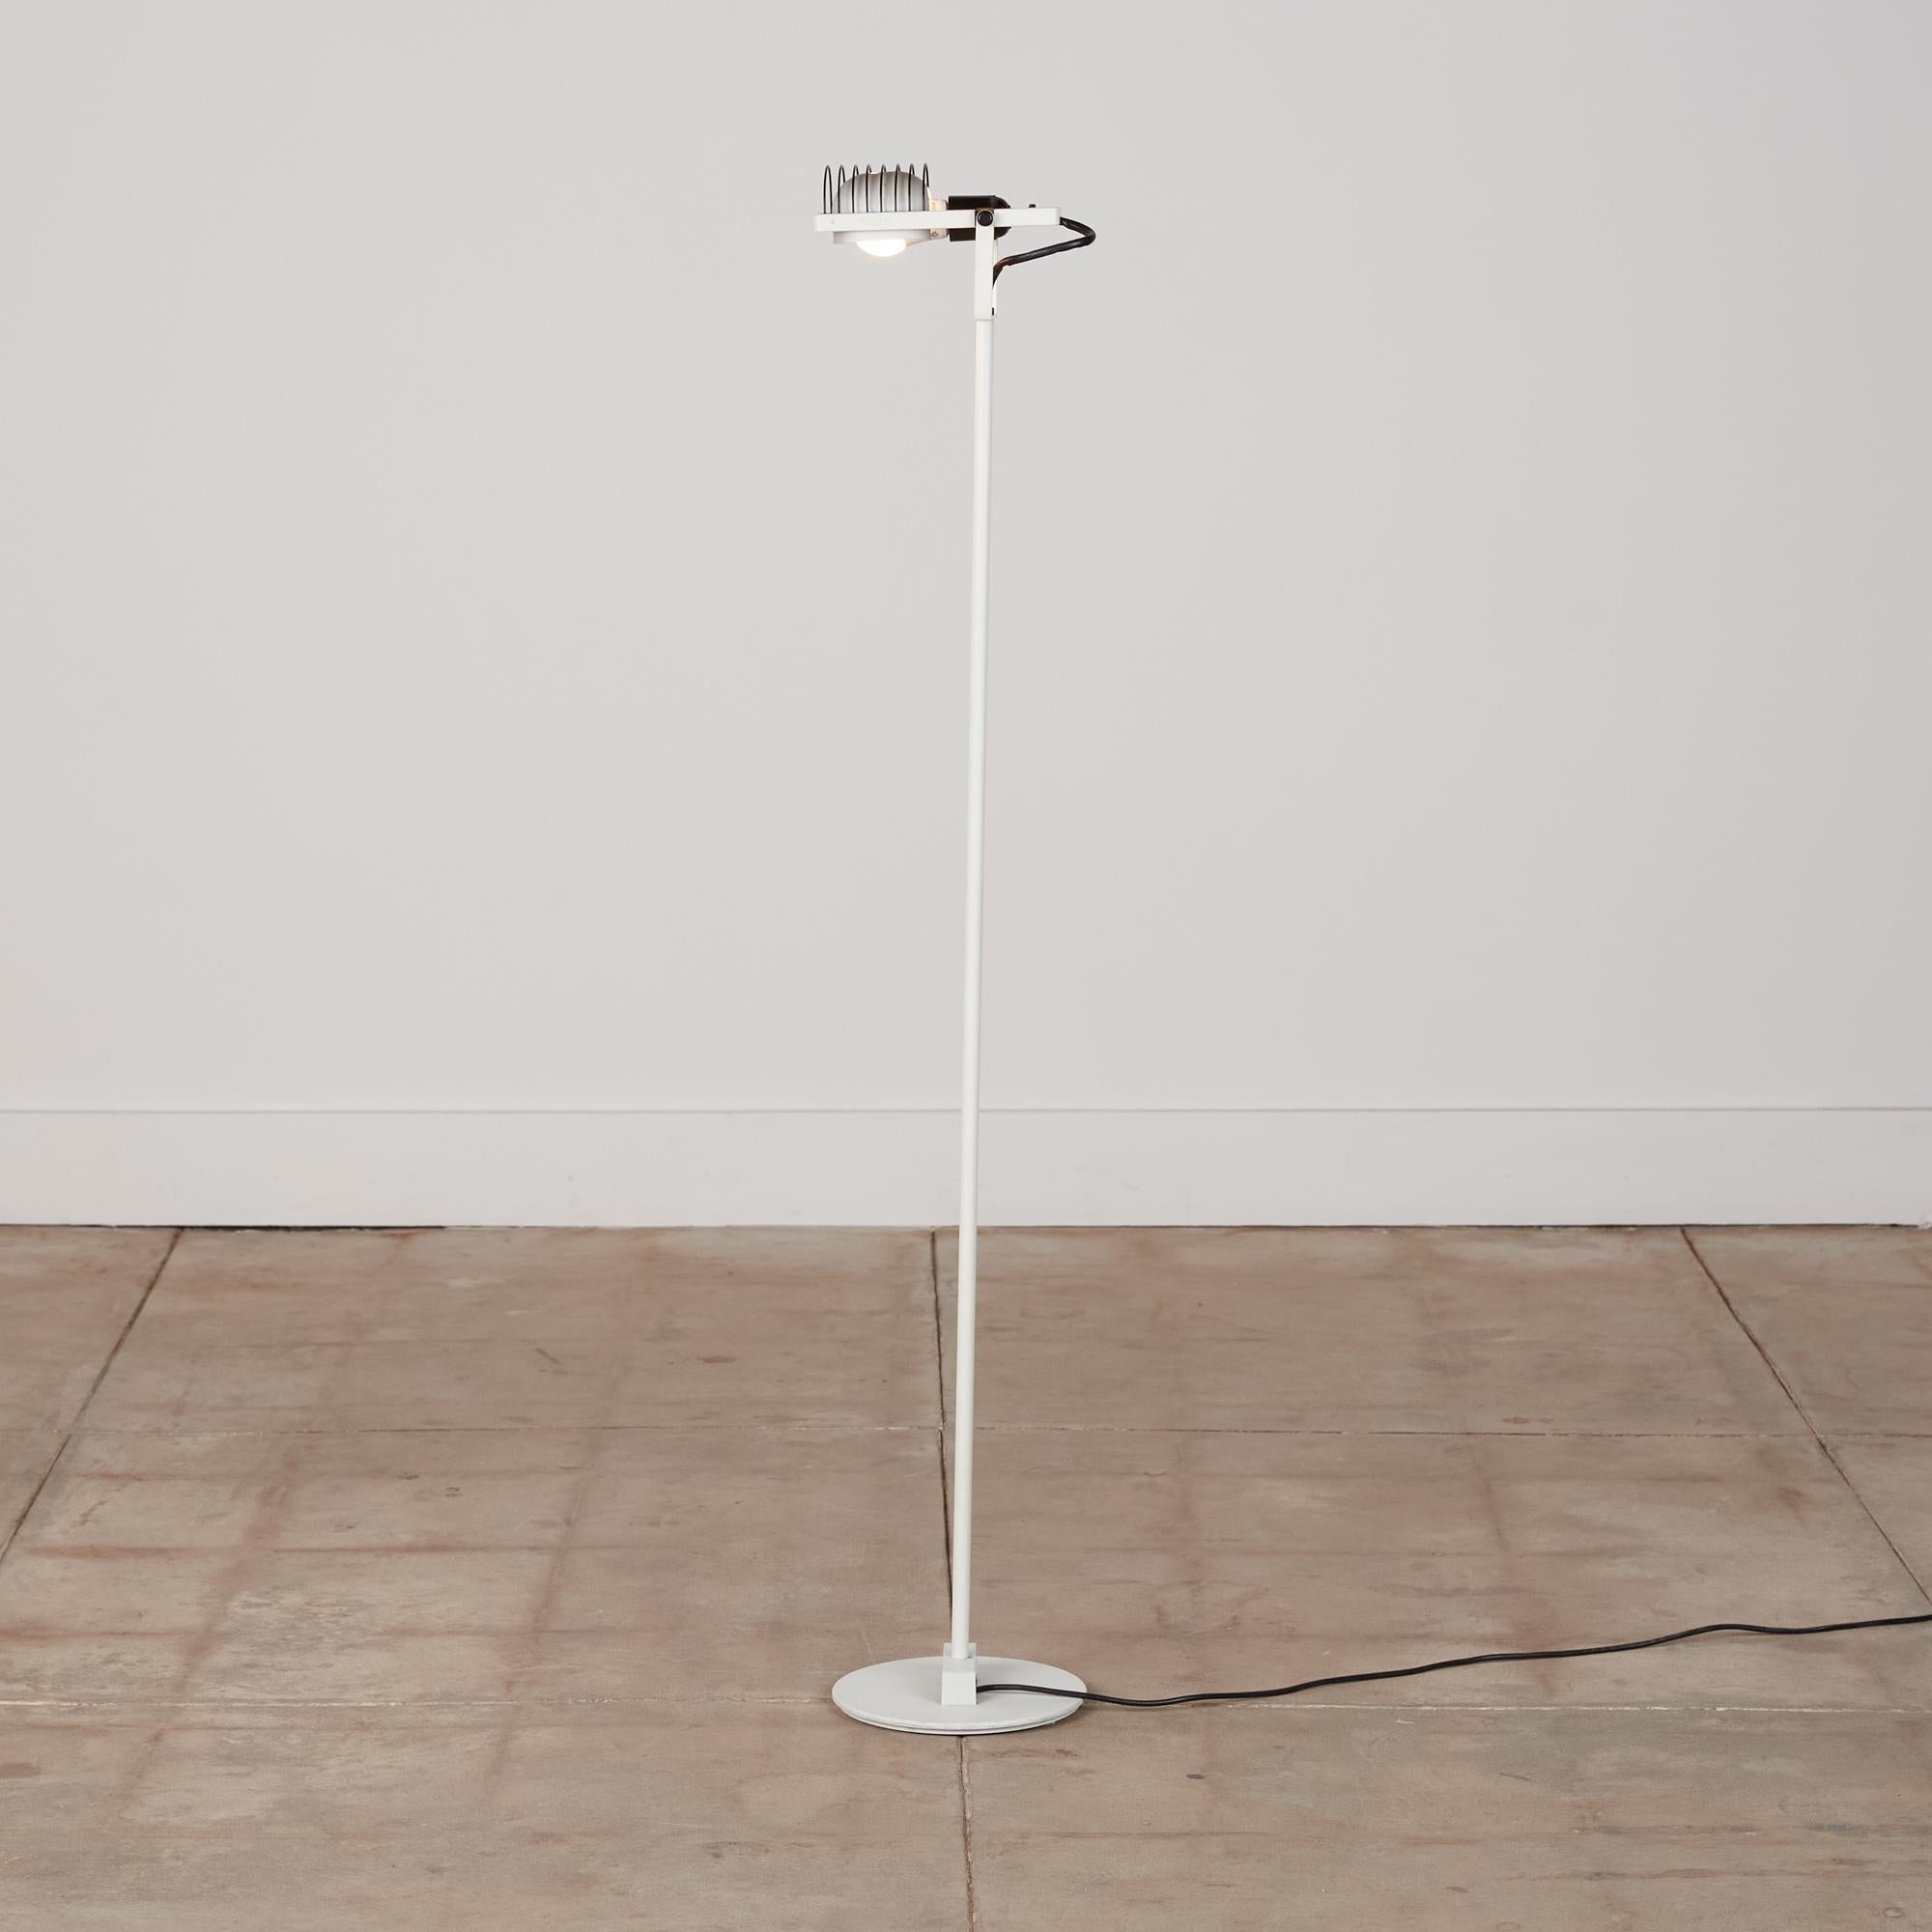 Ernesto Gismondi “Sintesi” floor lamp for Artemide, Italy, c. 1970s. The lamp features a white lacquered metal base and stem with black metal cage detail surrounding the housing for the bulb. The head of the lamp is adjustable and it features the